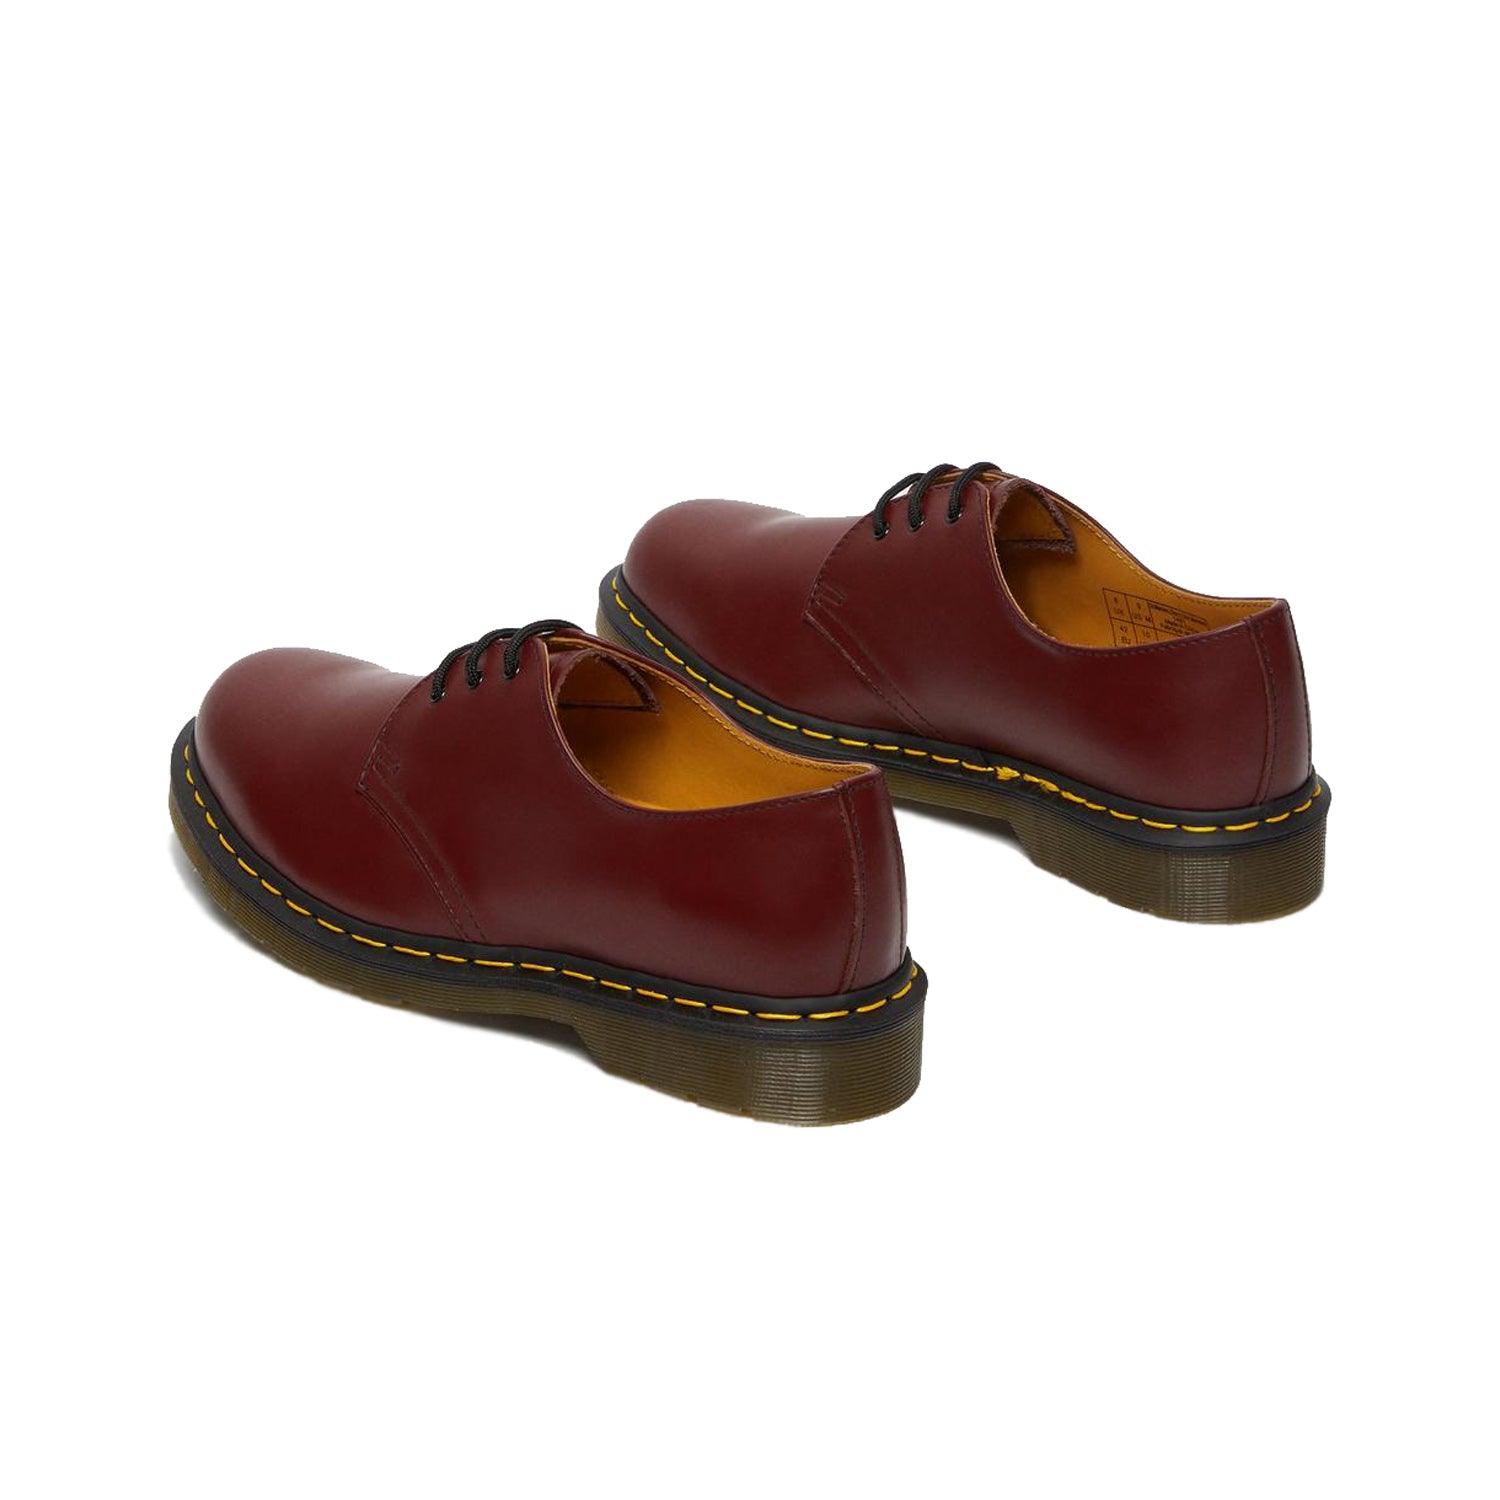 Dr. Martens 1461 Smooth Leather Shoes Cherry Red